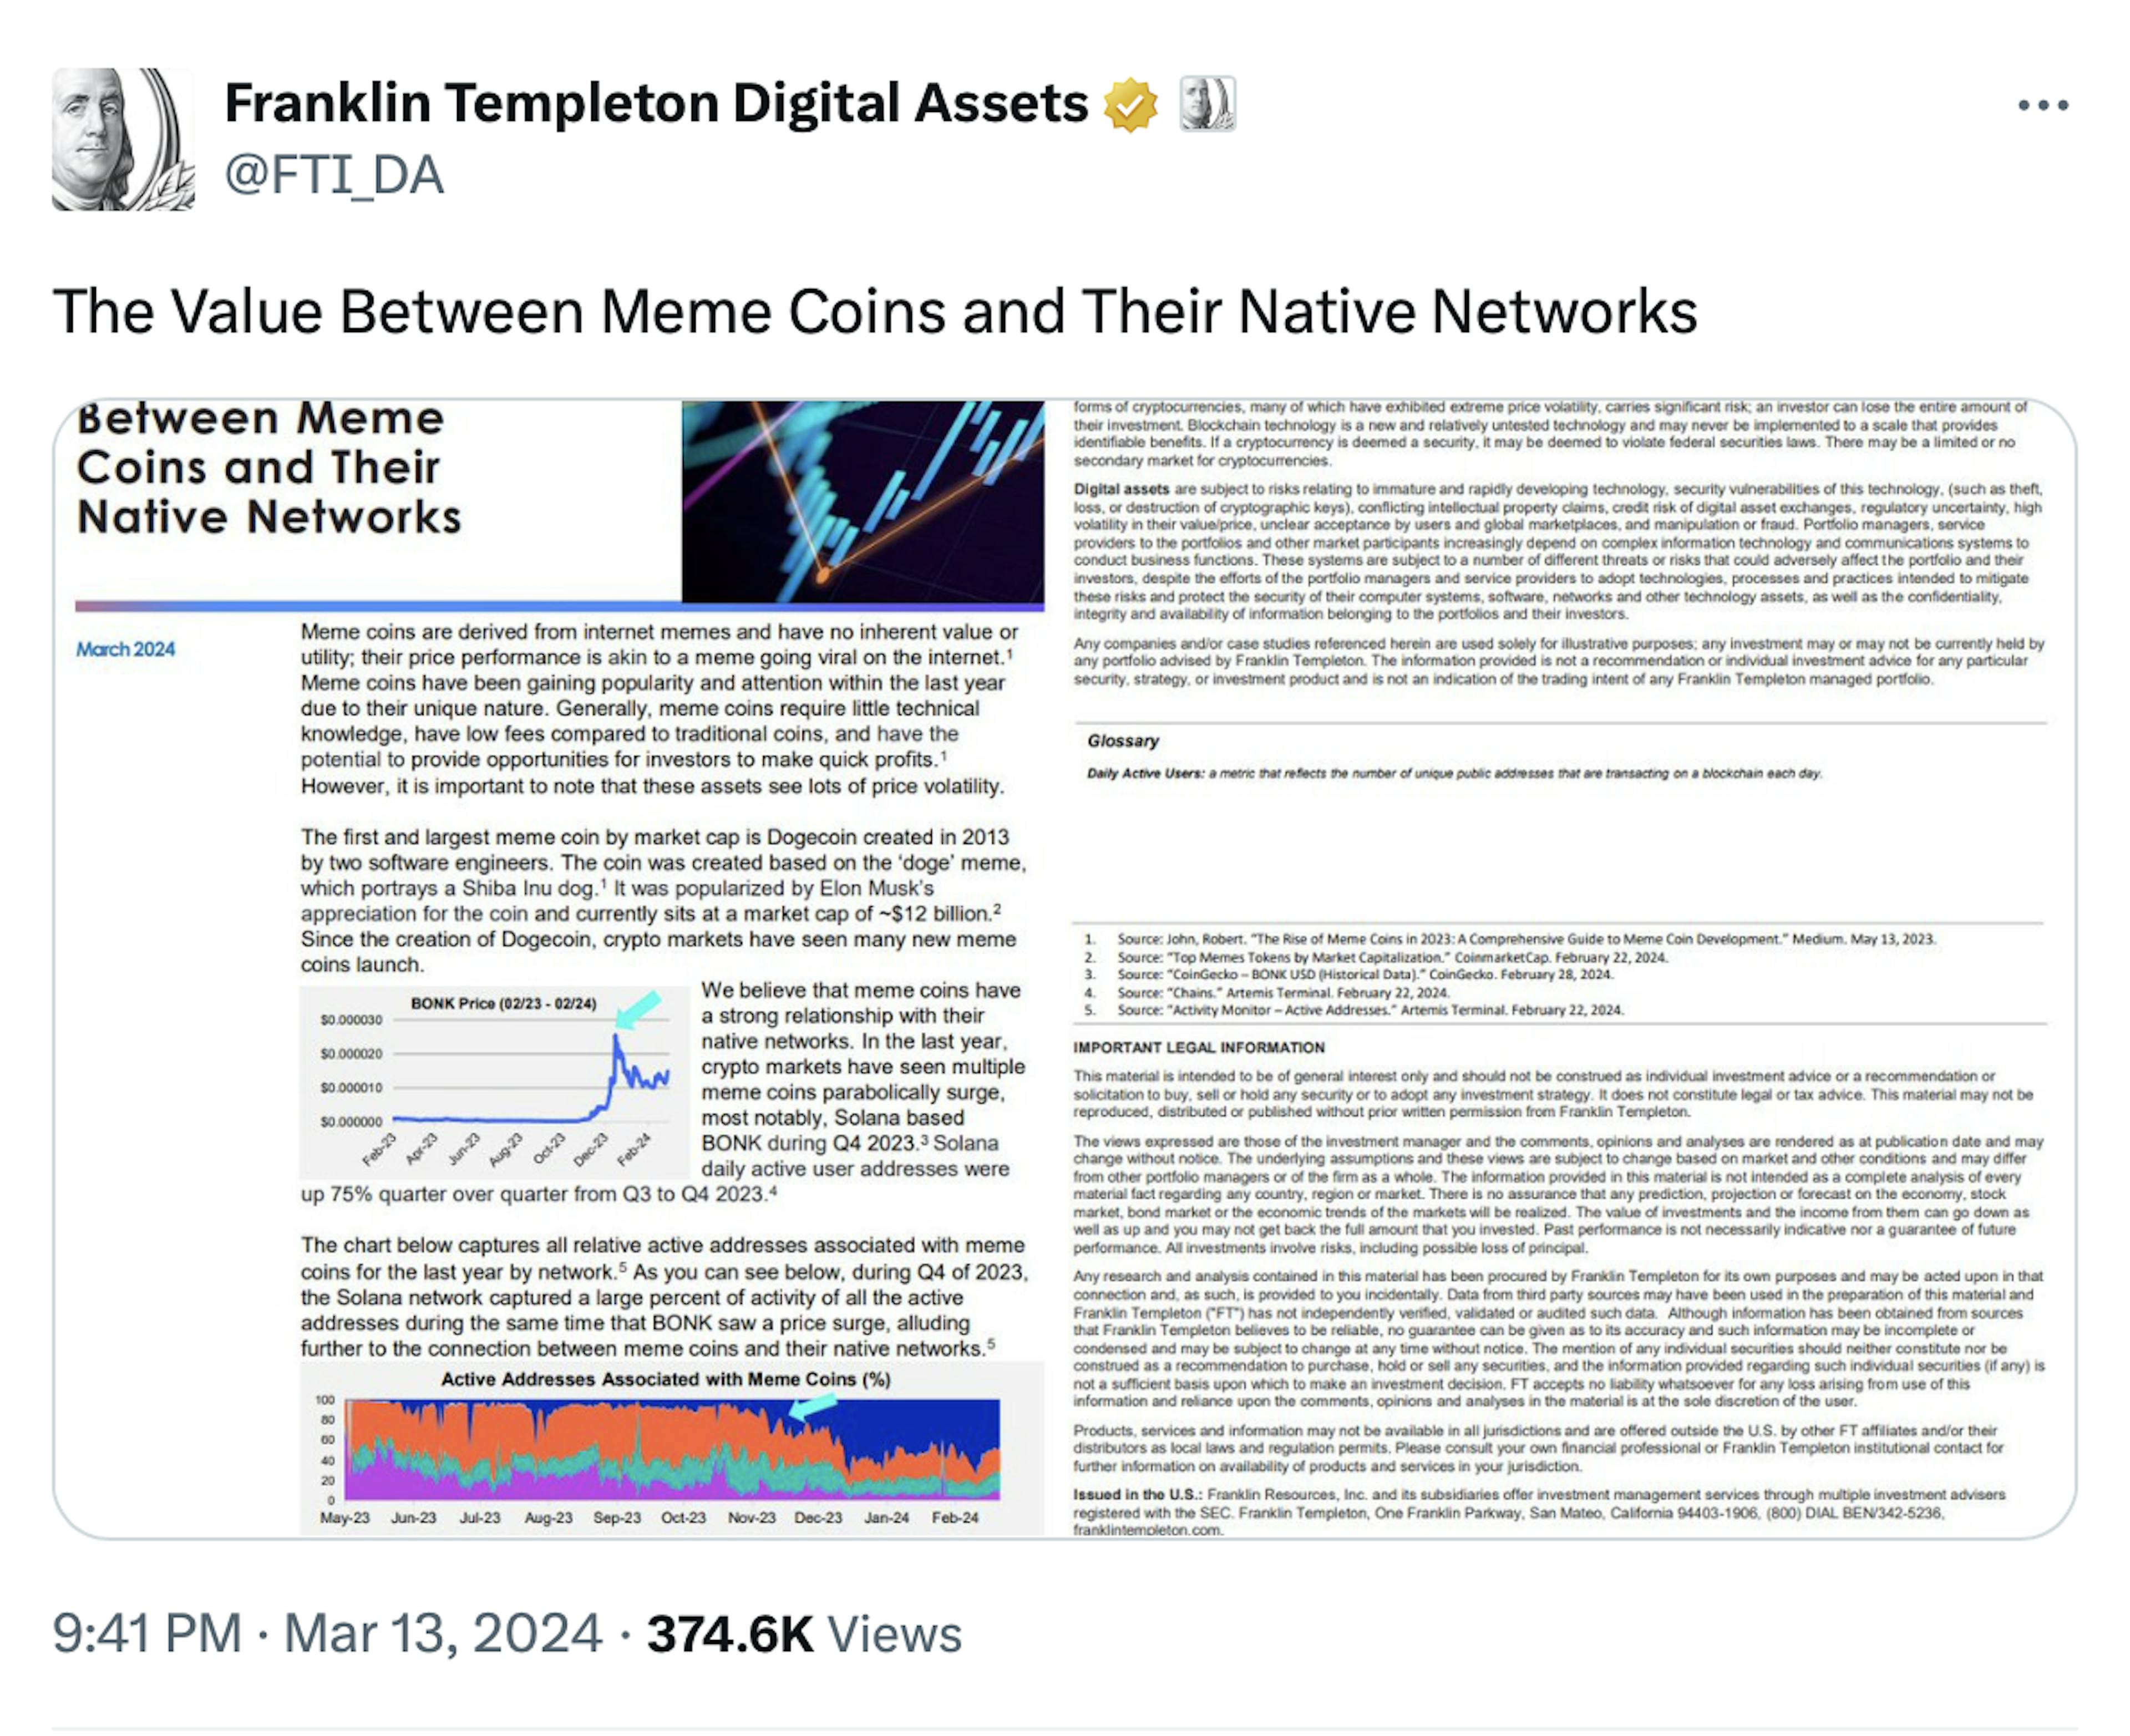 Even Franklin Templeton, one of the leading TradFi institutions in the US has written a paper on memes.